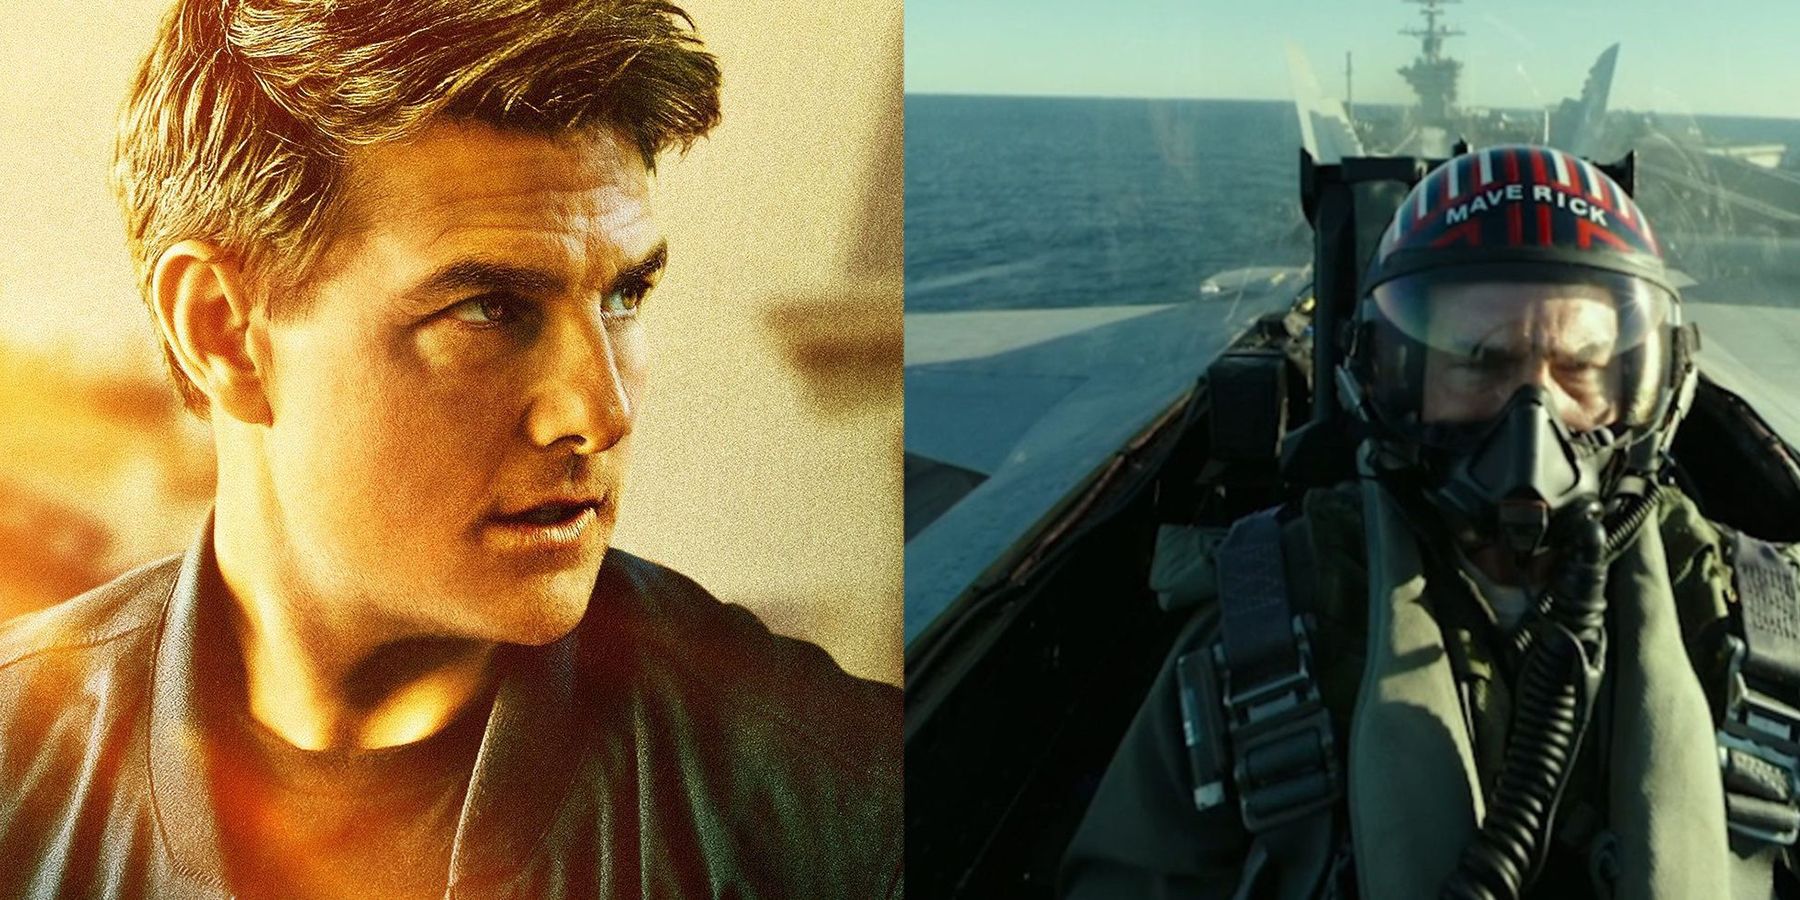 Tom Cruise in Mission Impossible 7 and Top Gun Maverick